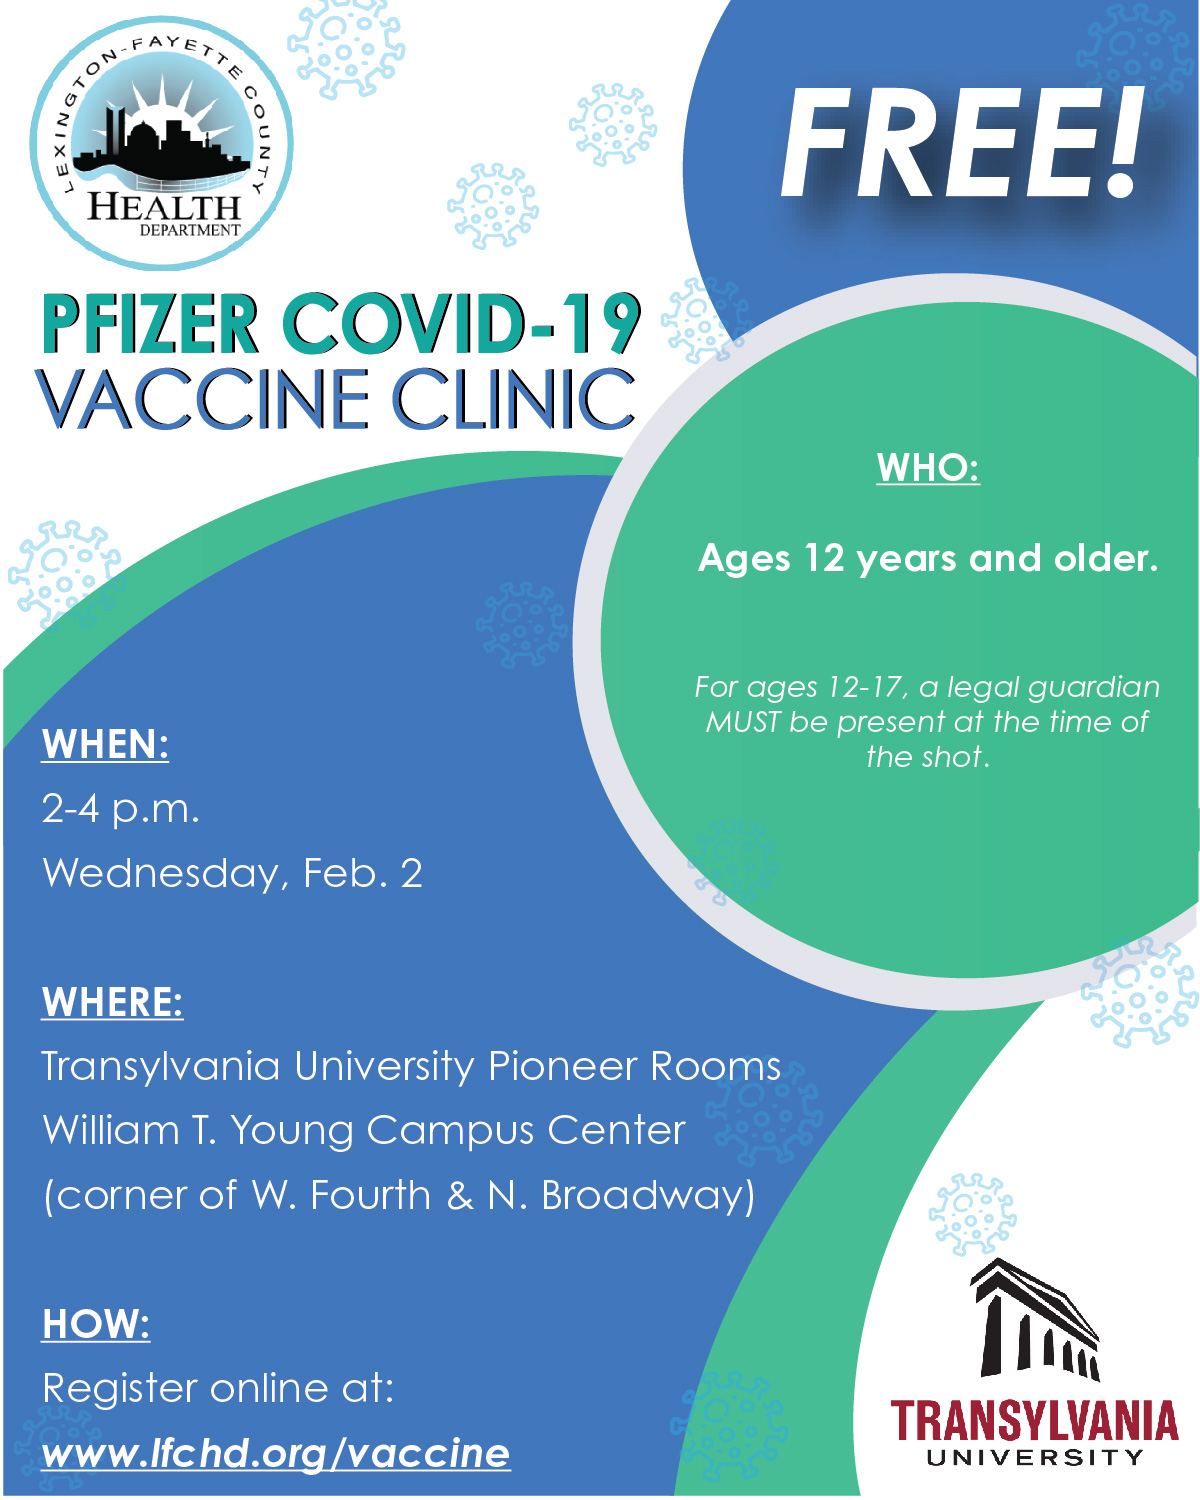 Transy, LFCHD partnering to provide free Pfizer vaccination clinic